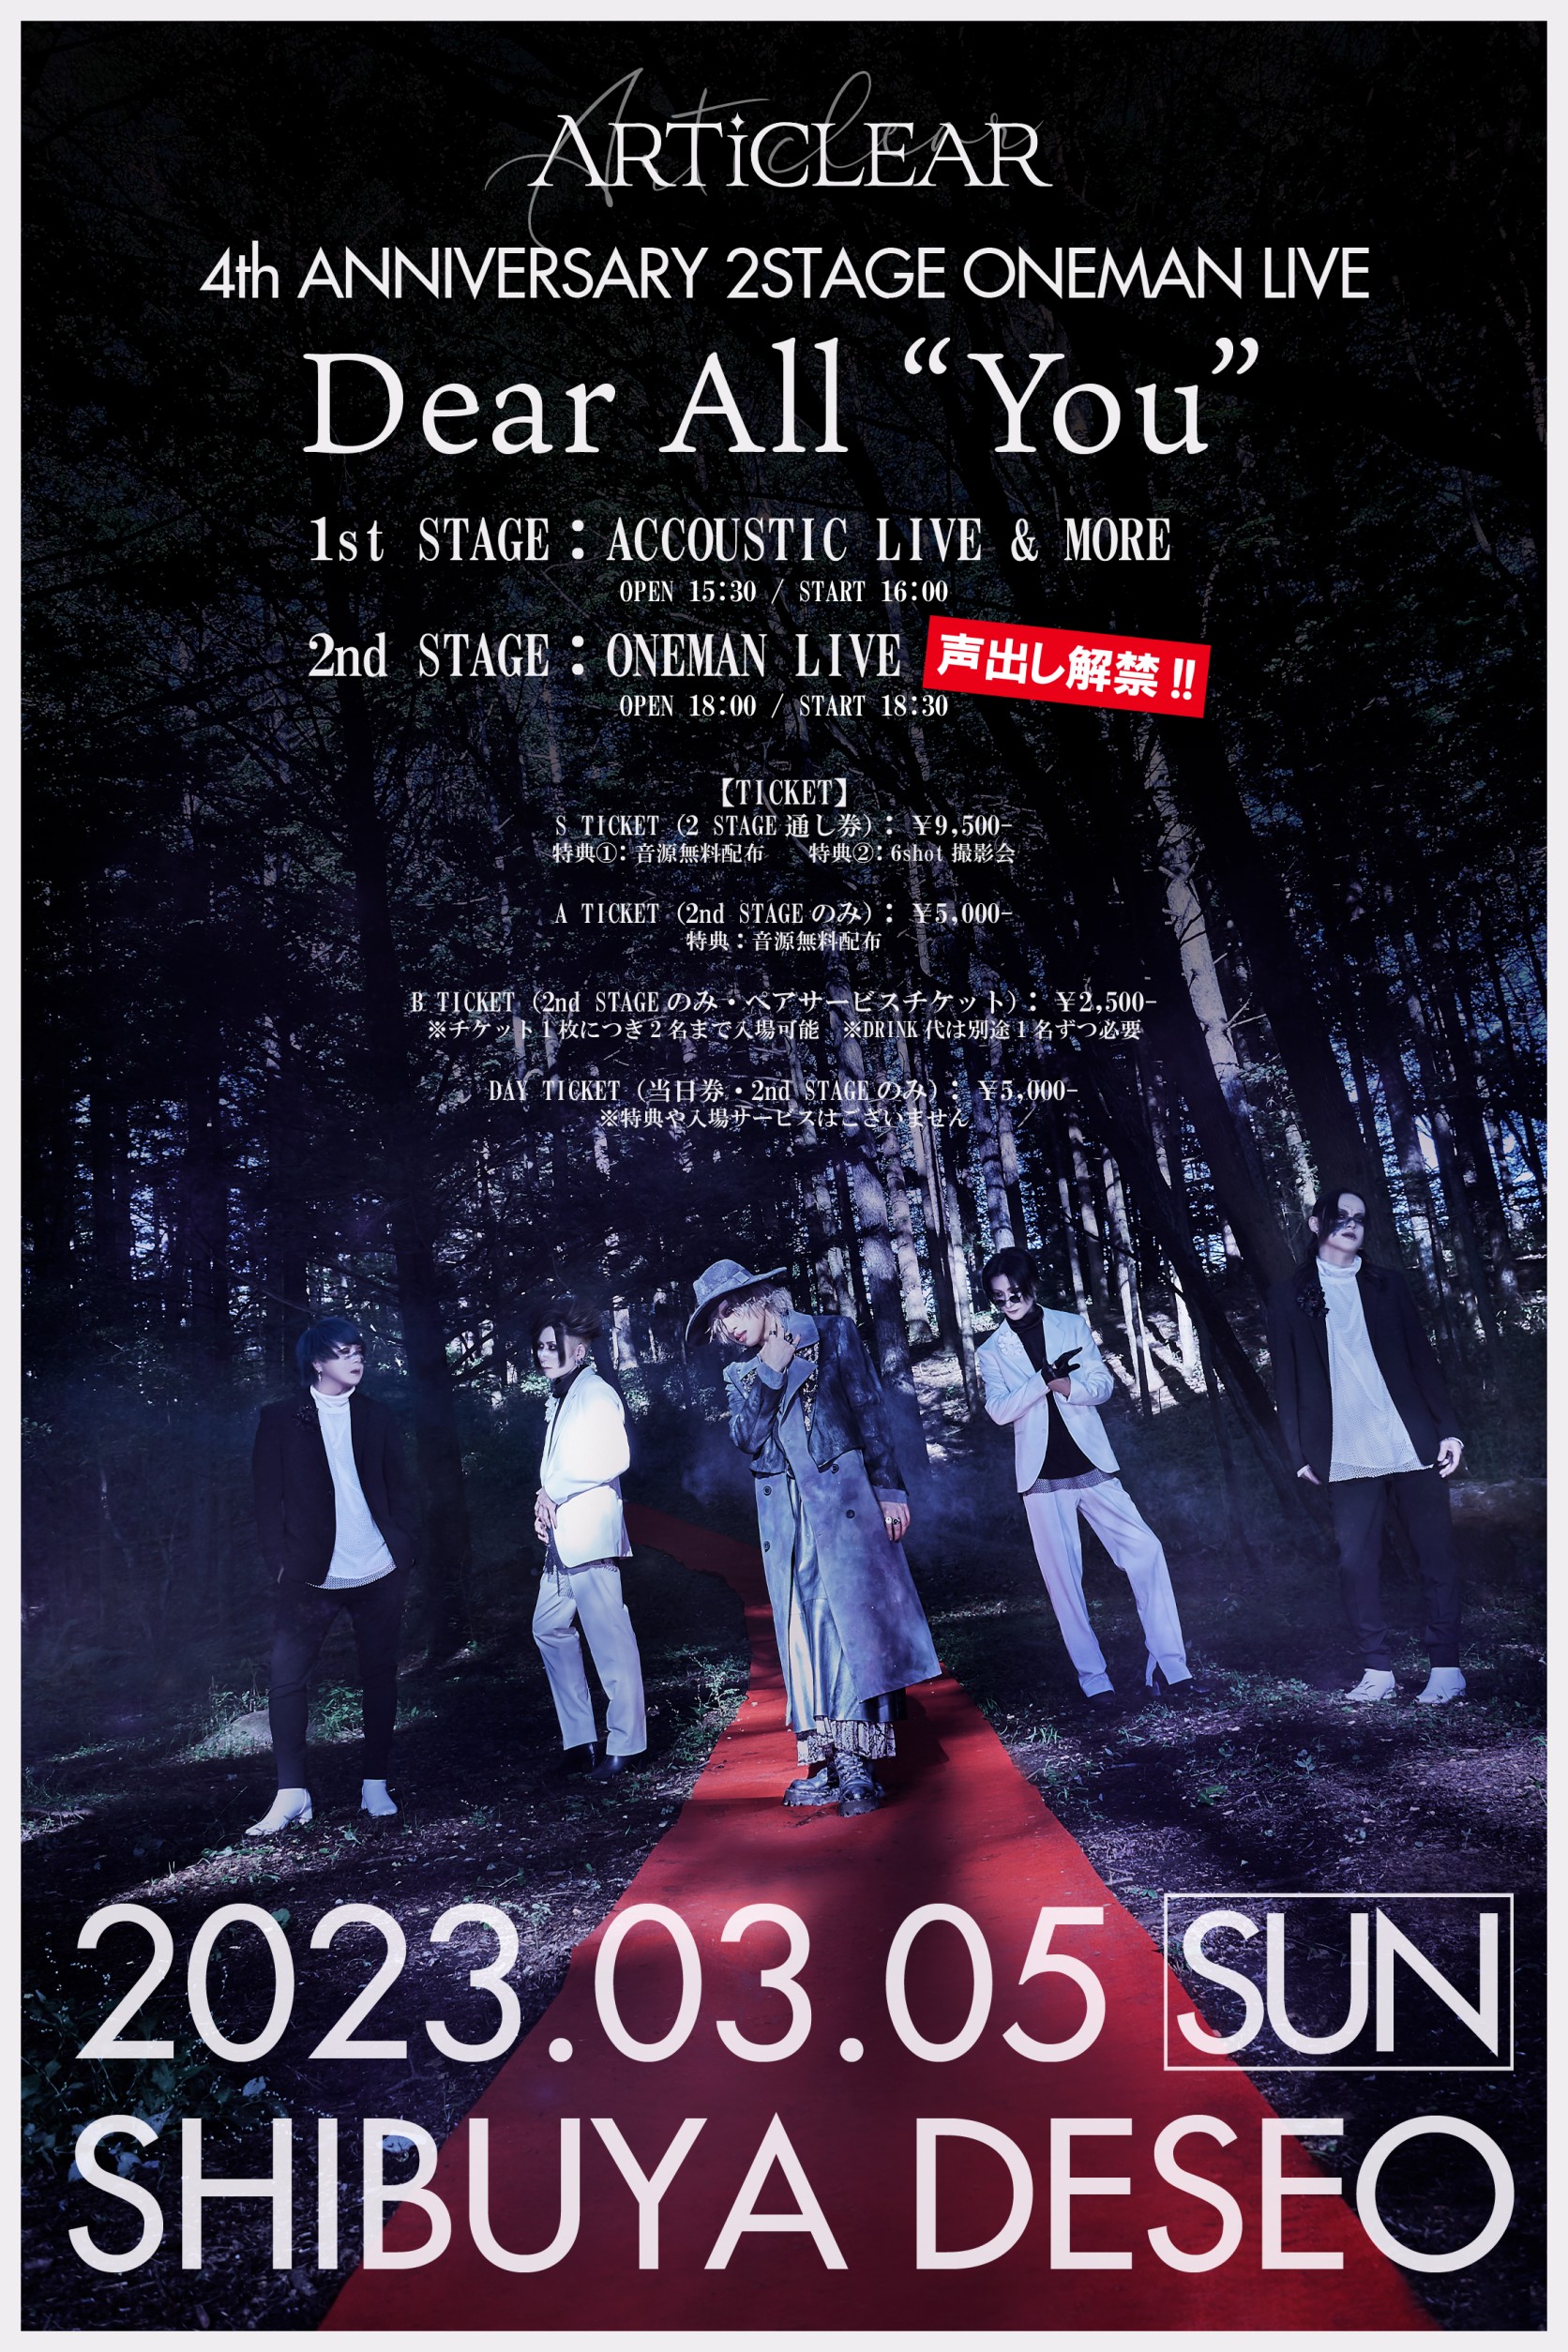 ARTiCLEAR 4th ANNIVERSARY 2STAGE ONEMAN LIVE Dear All “You”※ B TICKET（2nd STAGEのみペアサービスチケット）